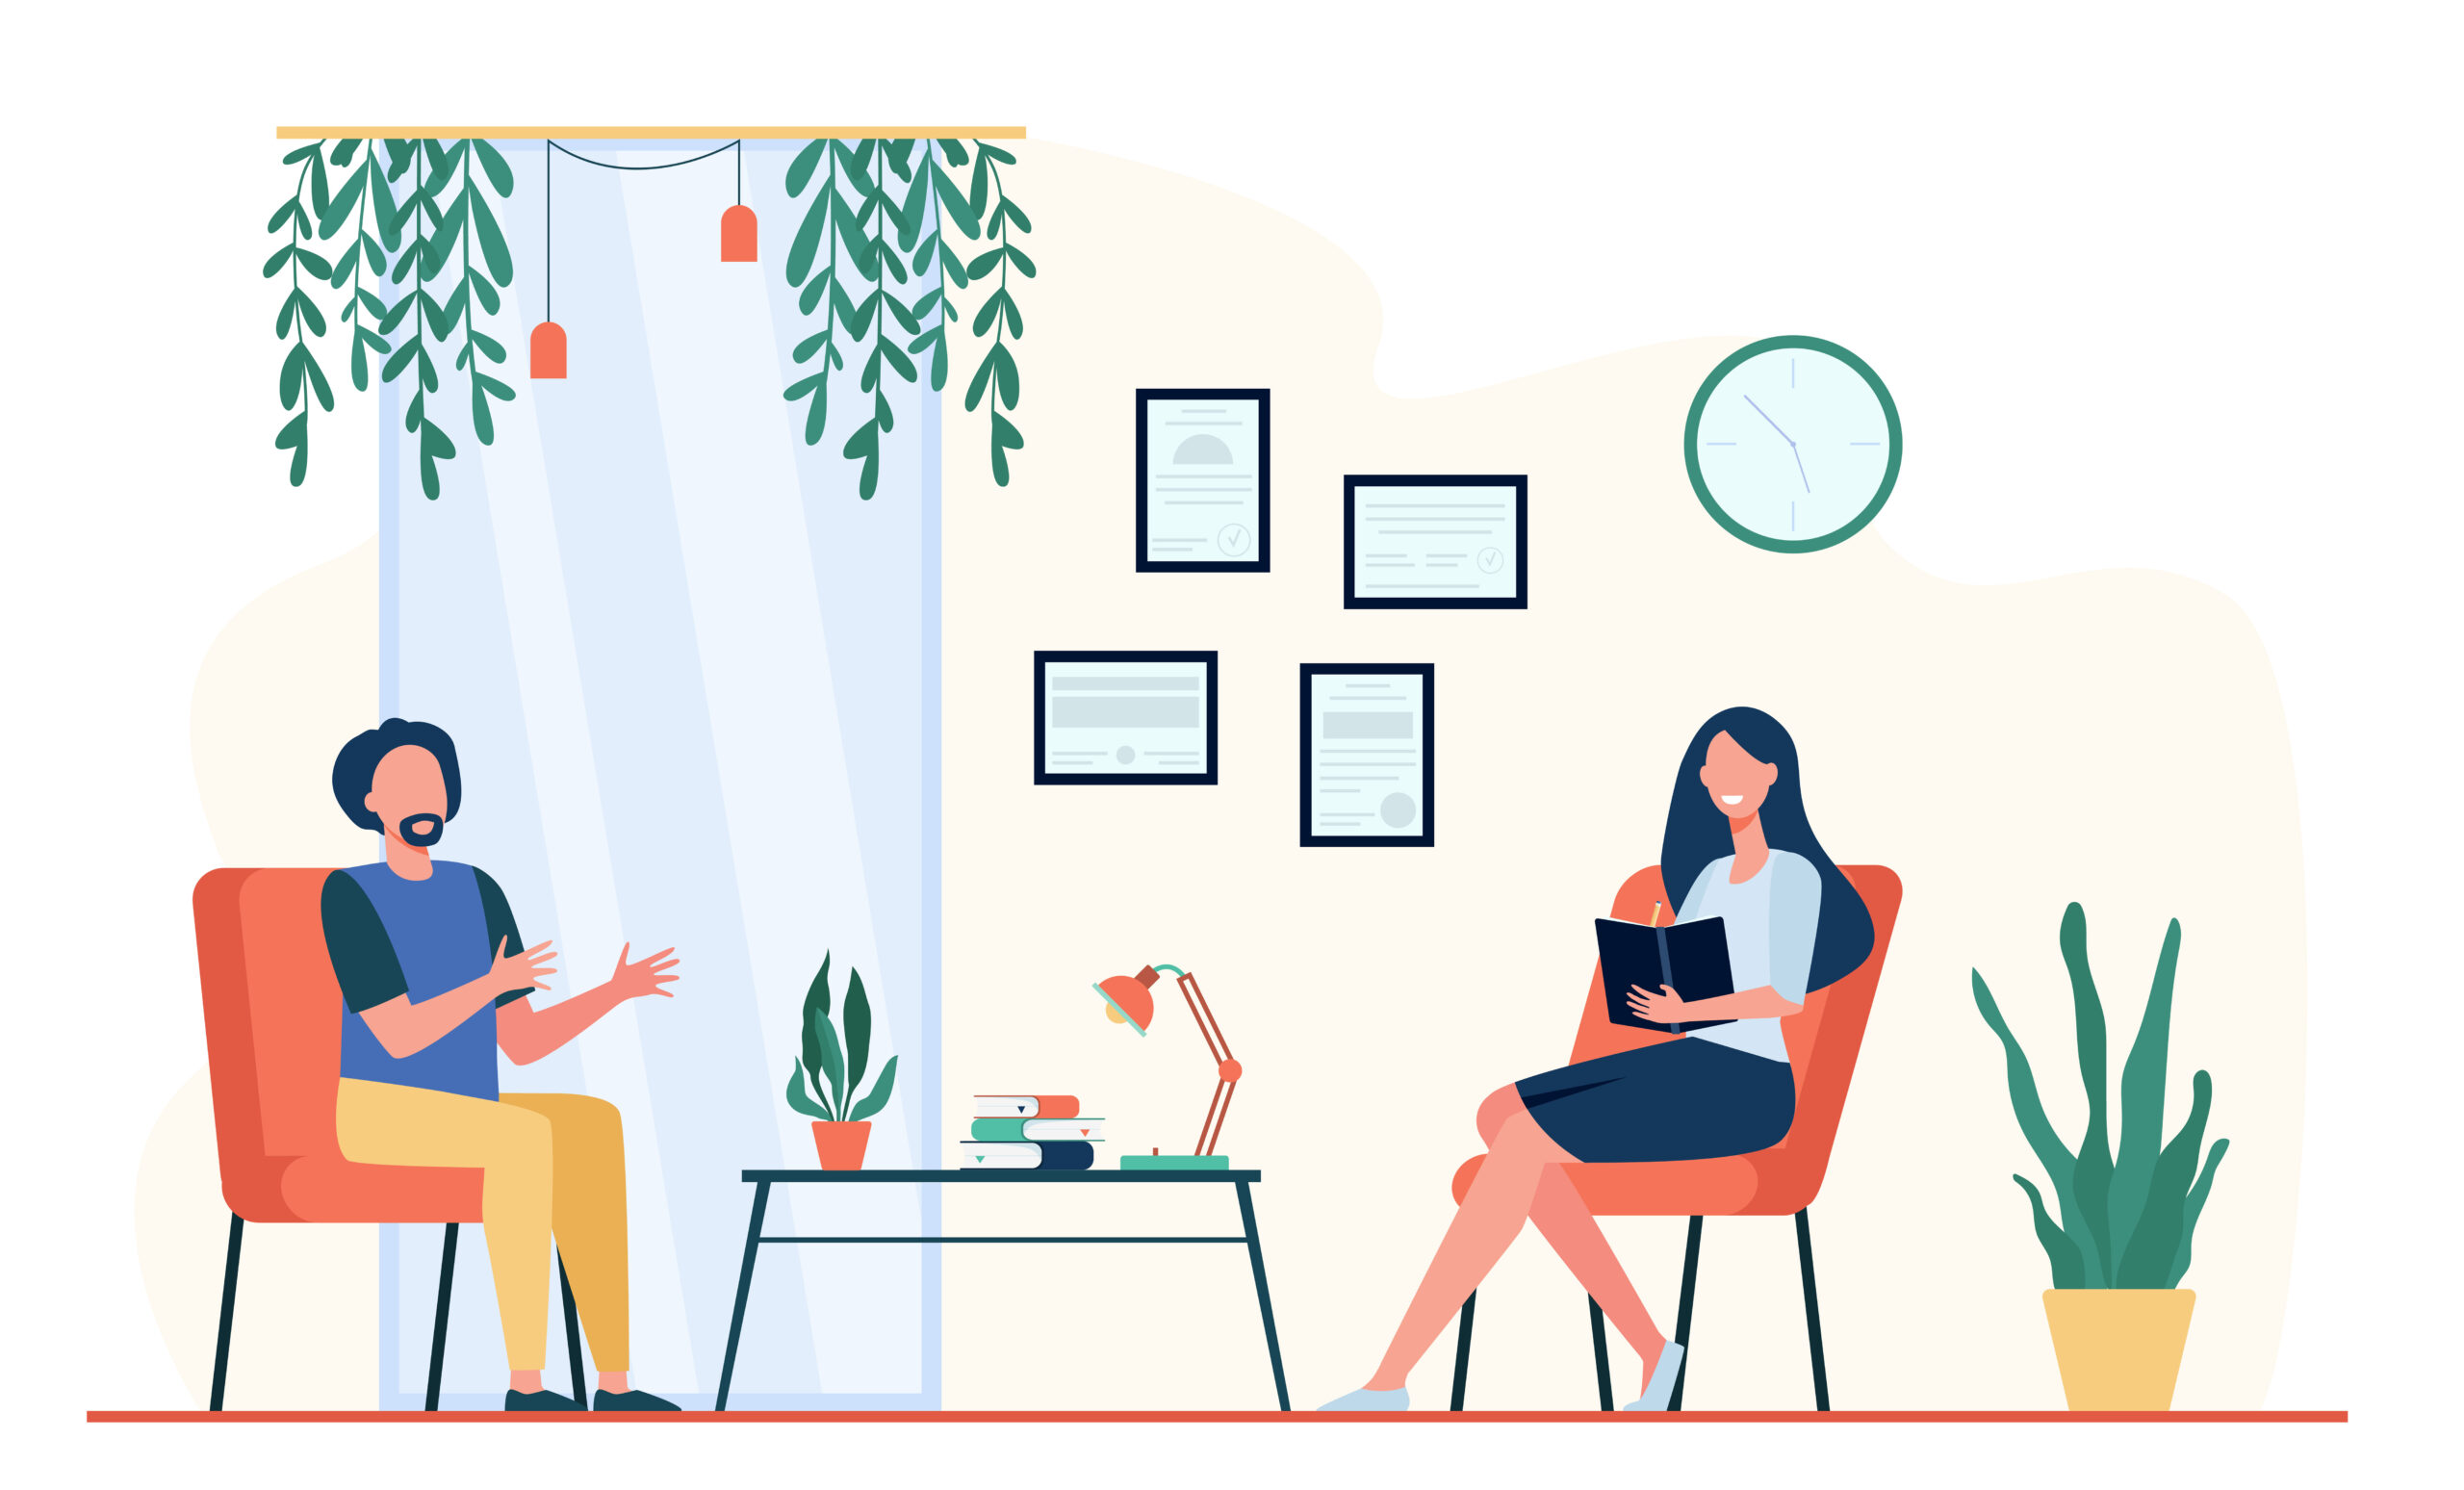 Man talking to therapist in her office. Patient sitting in armchair and speaking while positive doctor taking notes. Vector illustration for psychological counseling, psychotherapy concept